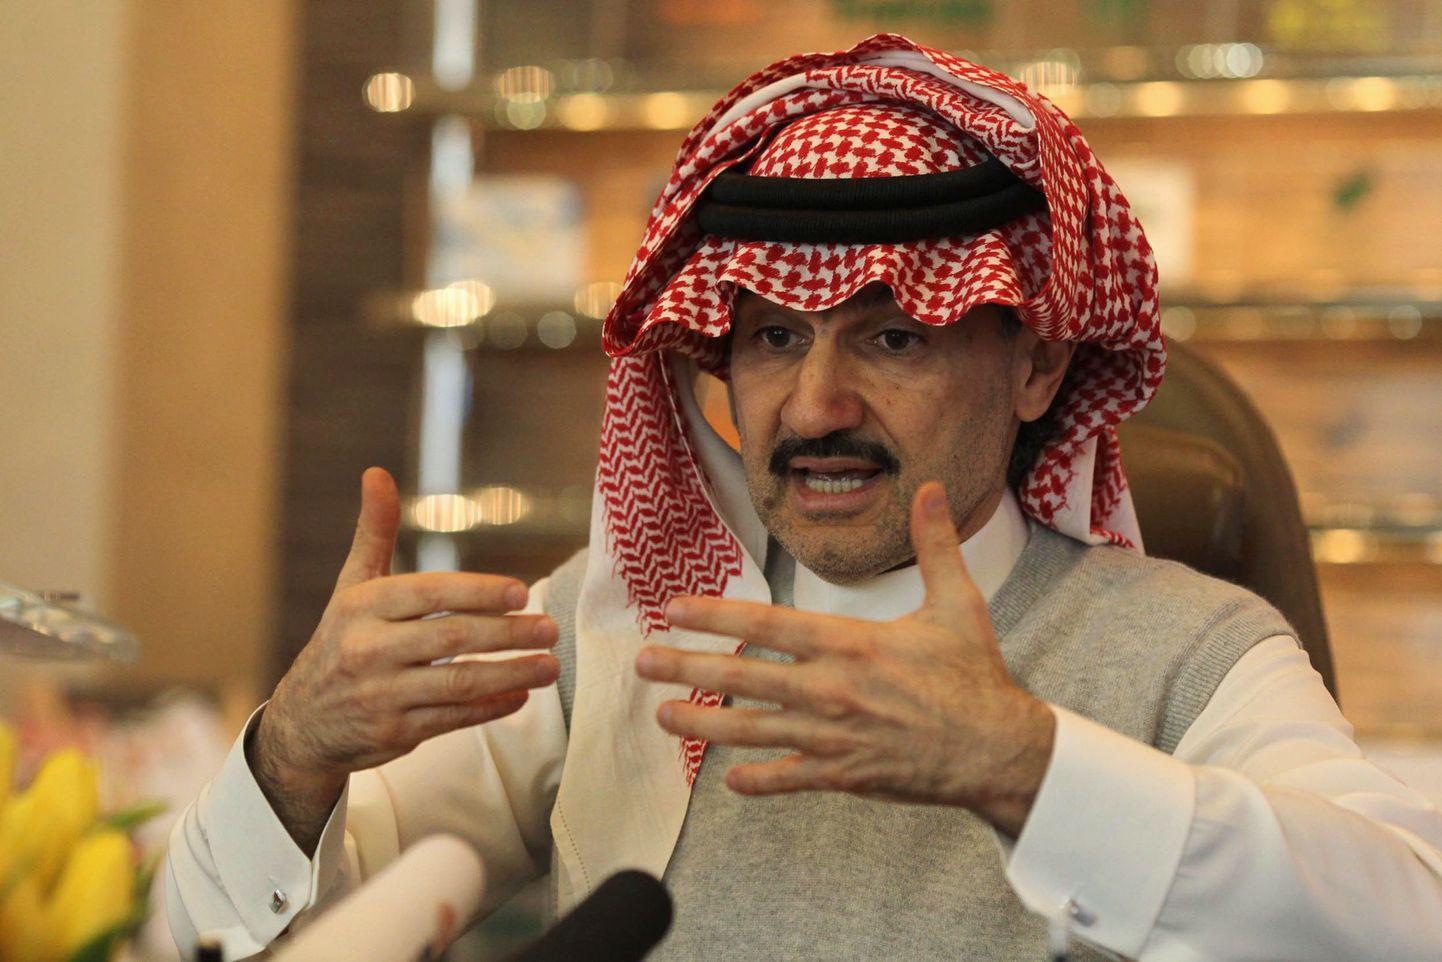 Saudi Prince Alwaleed bin Talal speaks during an interview with Reuters at his offices in Kingdom Tower in Riyadh, May 6, 2013. A potential split-up of the operations of U.S. bank Citigroup Inc is now "completely dead," Saudi prince Alwaleed bin Talal, the bank's largest individual shareholder said in an interview on Monday. REUTERS/Faisal Al Nasser (SAUDI ARABIA - Tags: BUSINESS)